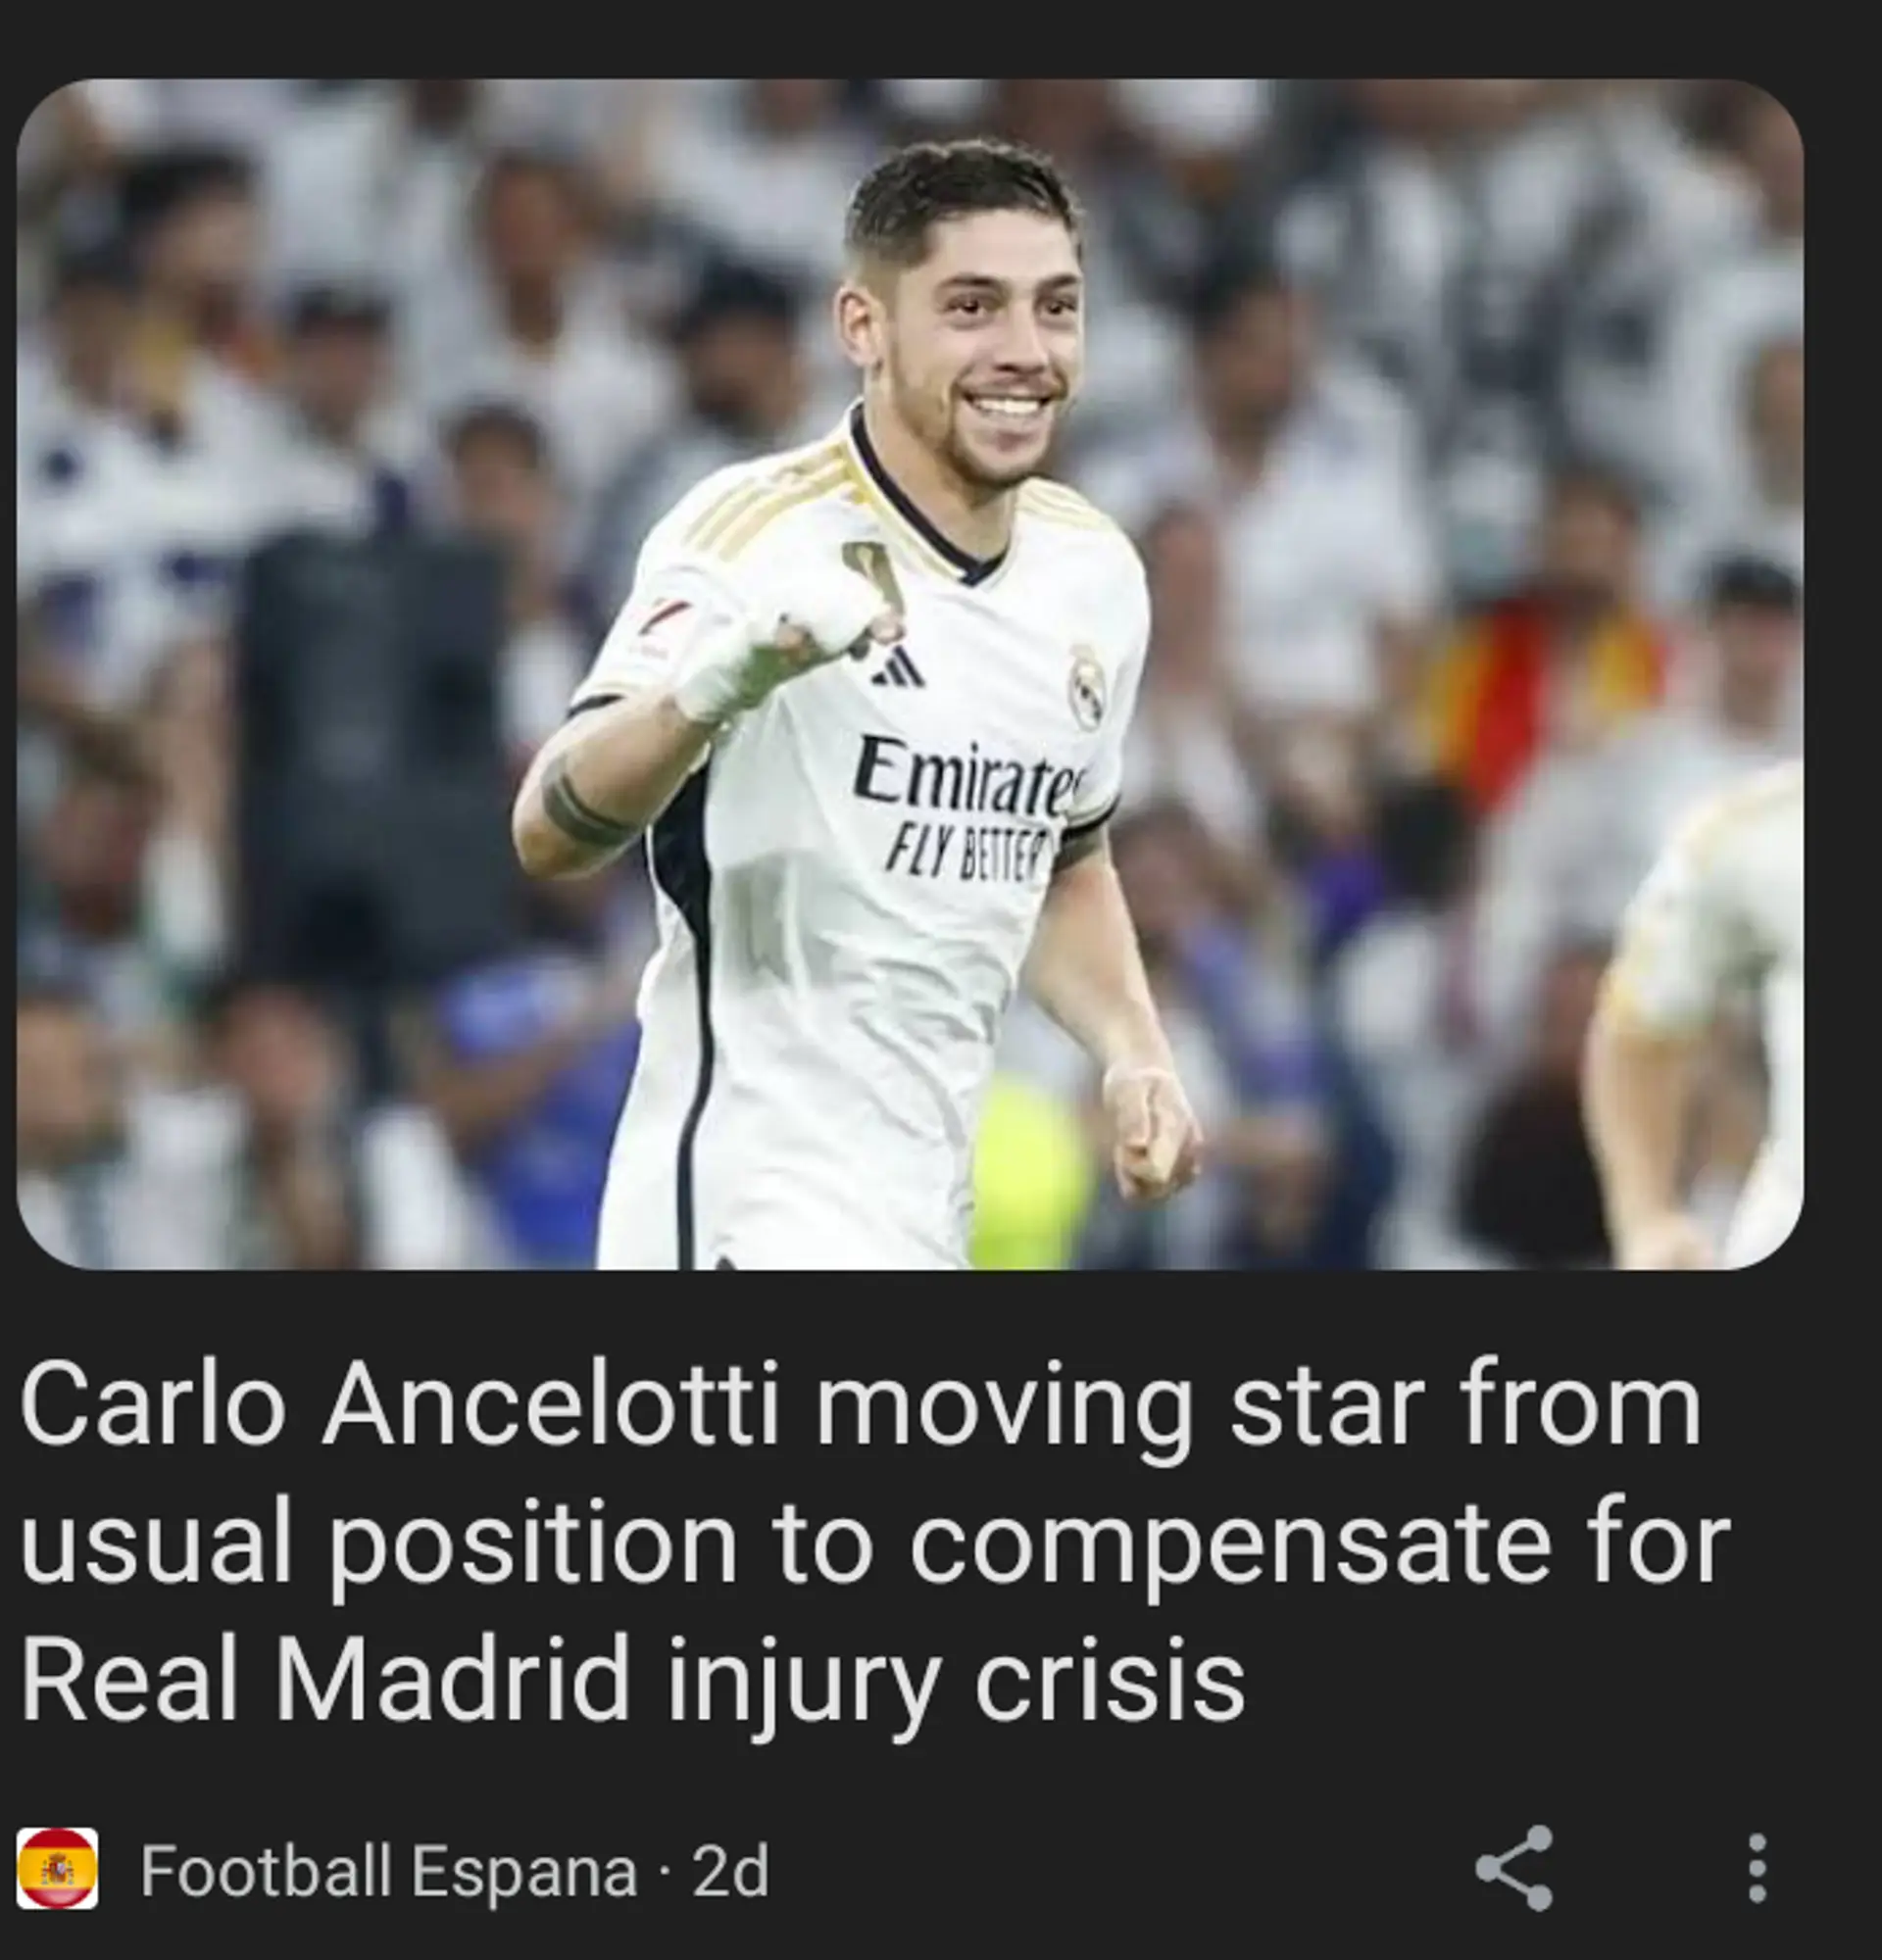 Injury time for Real Madrid 😁😁😁😁😛😛😛, thought they were untouchable 